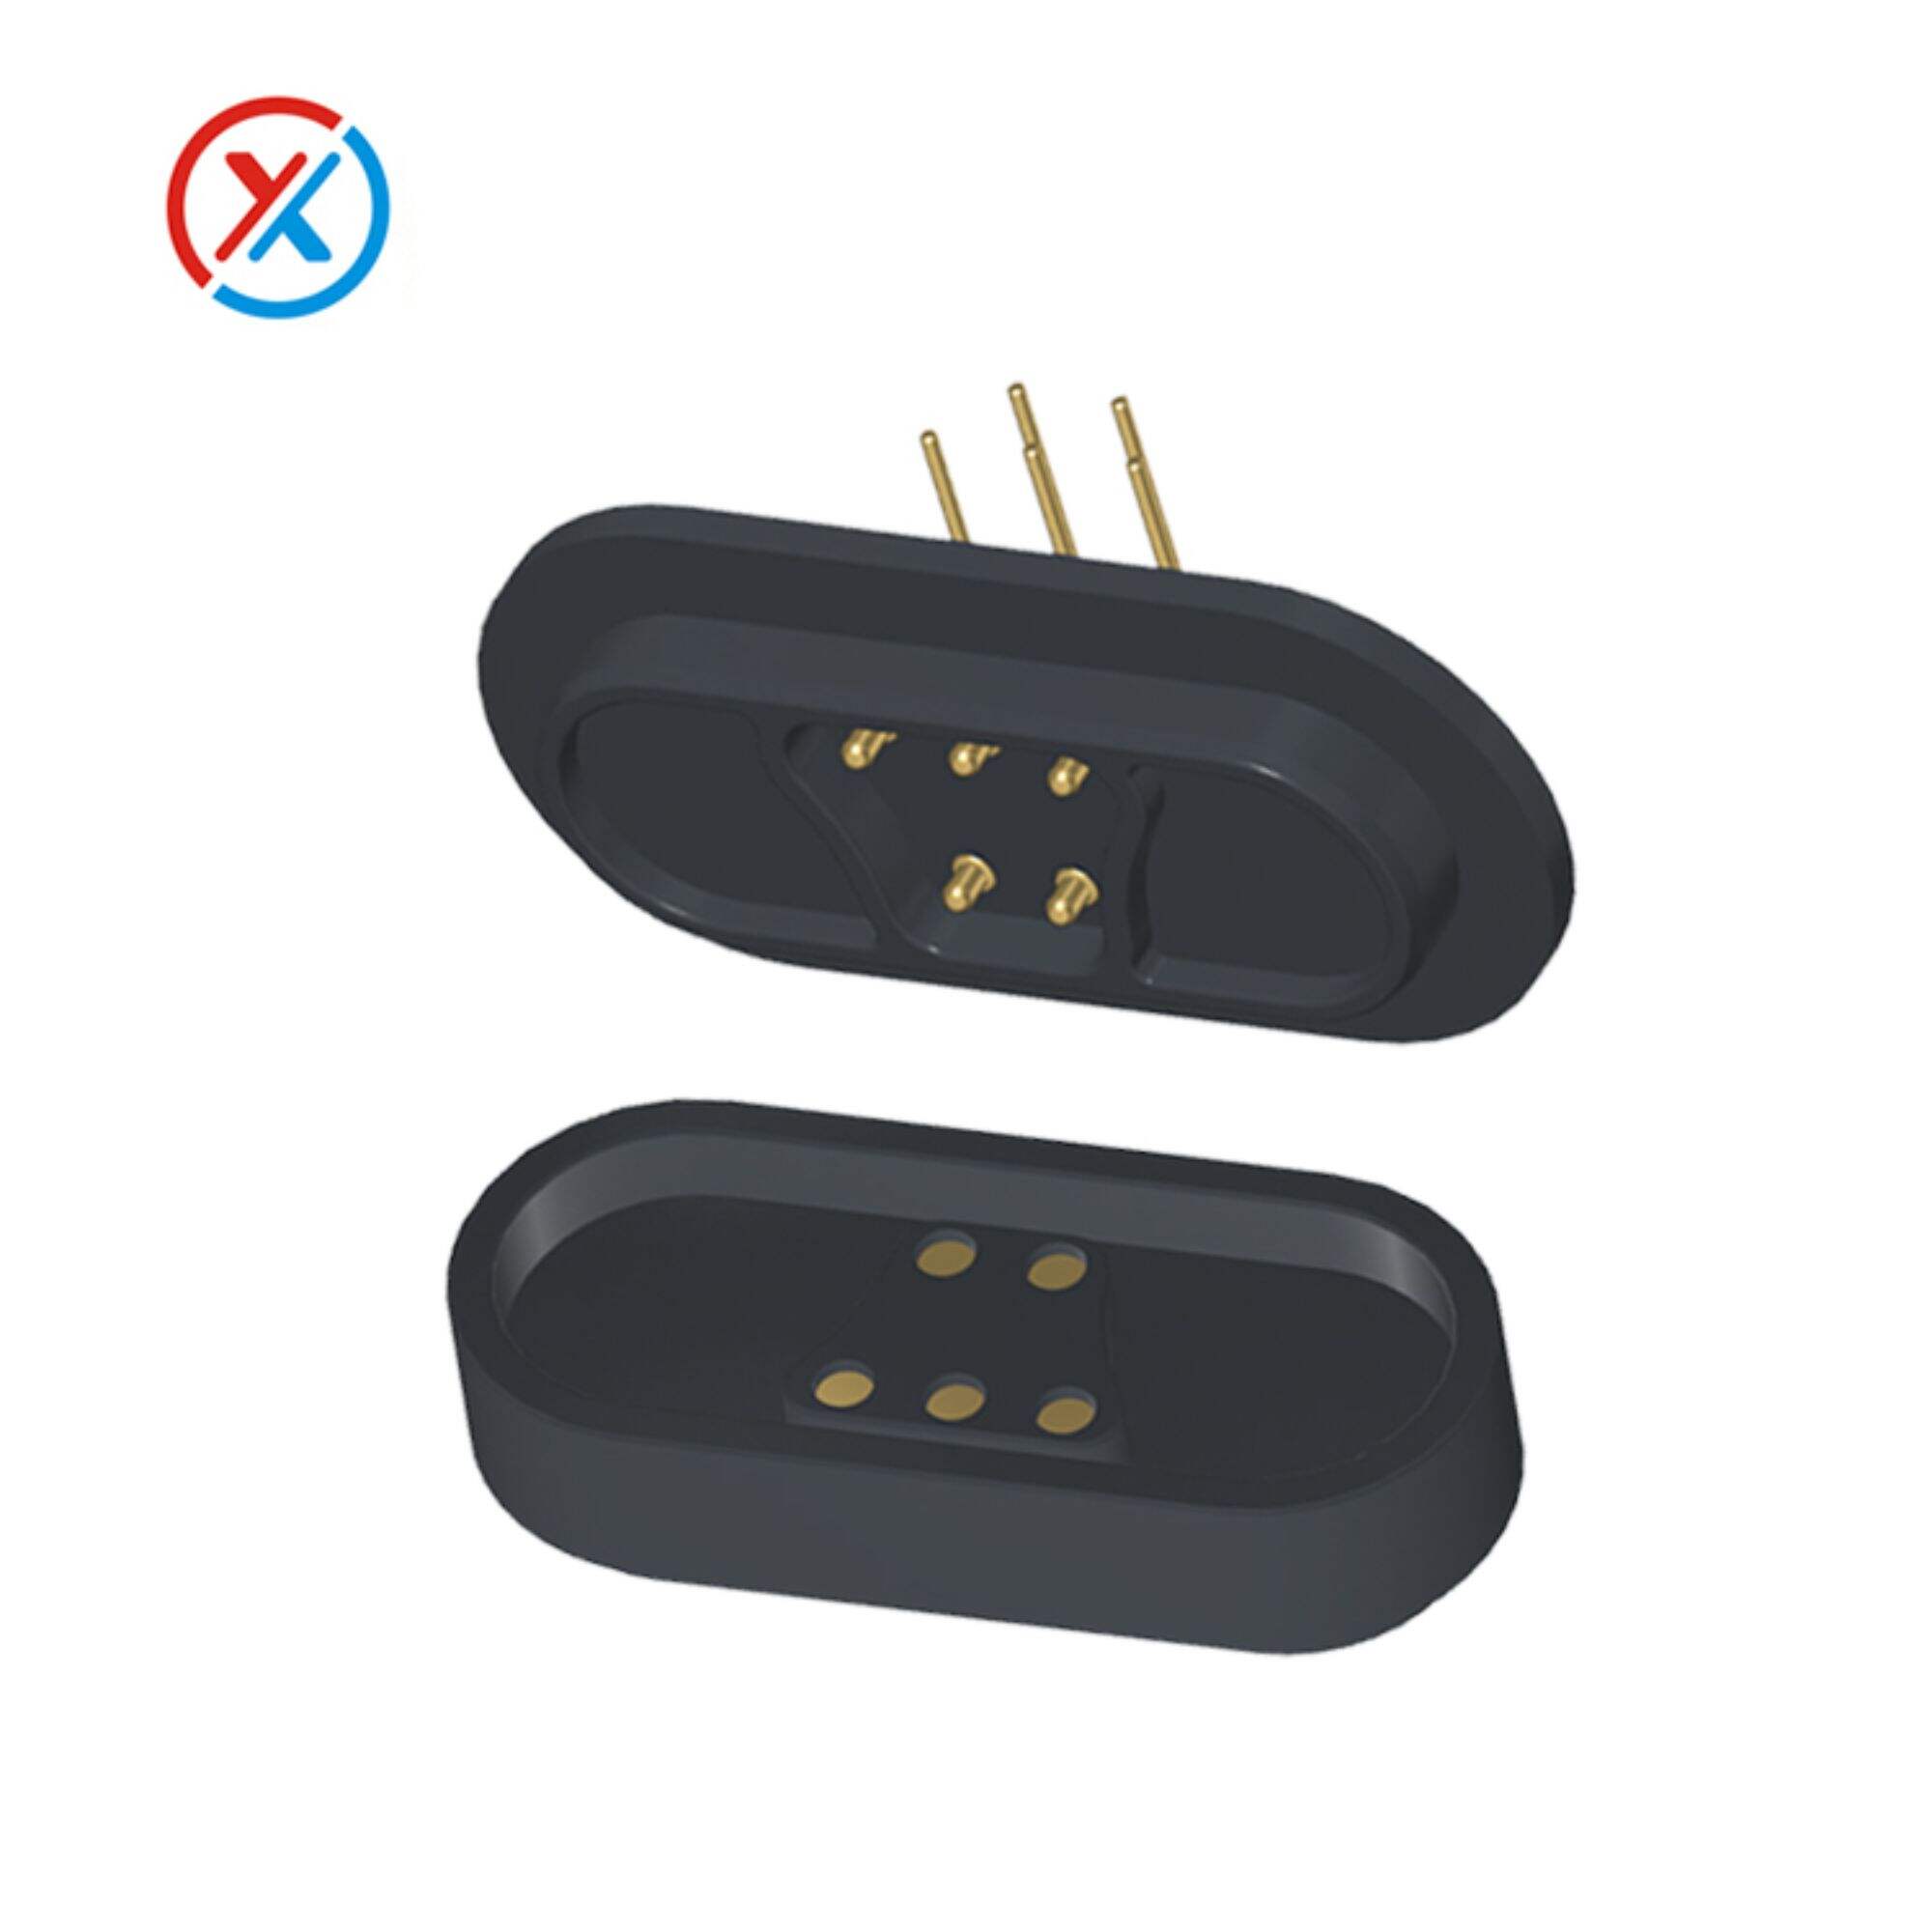 Lead-free gold plated customizable magnetic pogopin connector Bent 5-pin runway magnetic connector